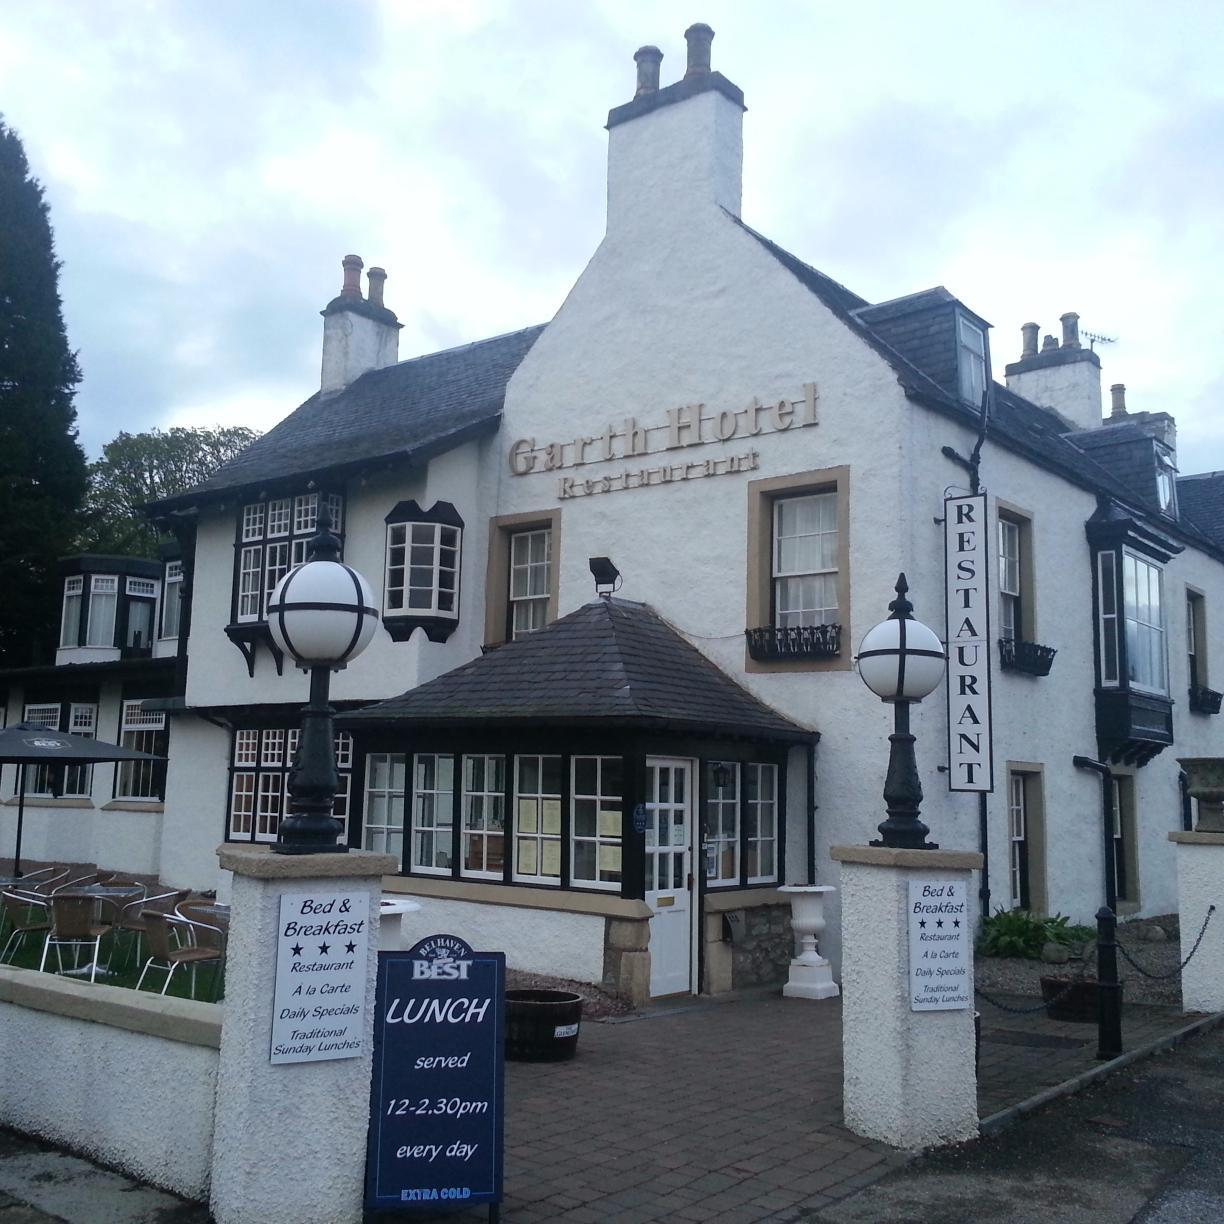 Independently owned traditional hotel in the Highland village of Grantown-on-Spey. Great base for golf, fishing, walking, distilleries and exploring the area